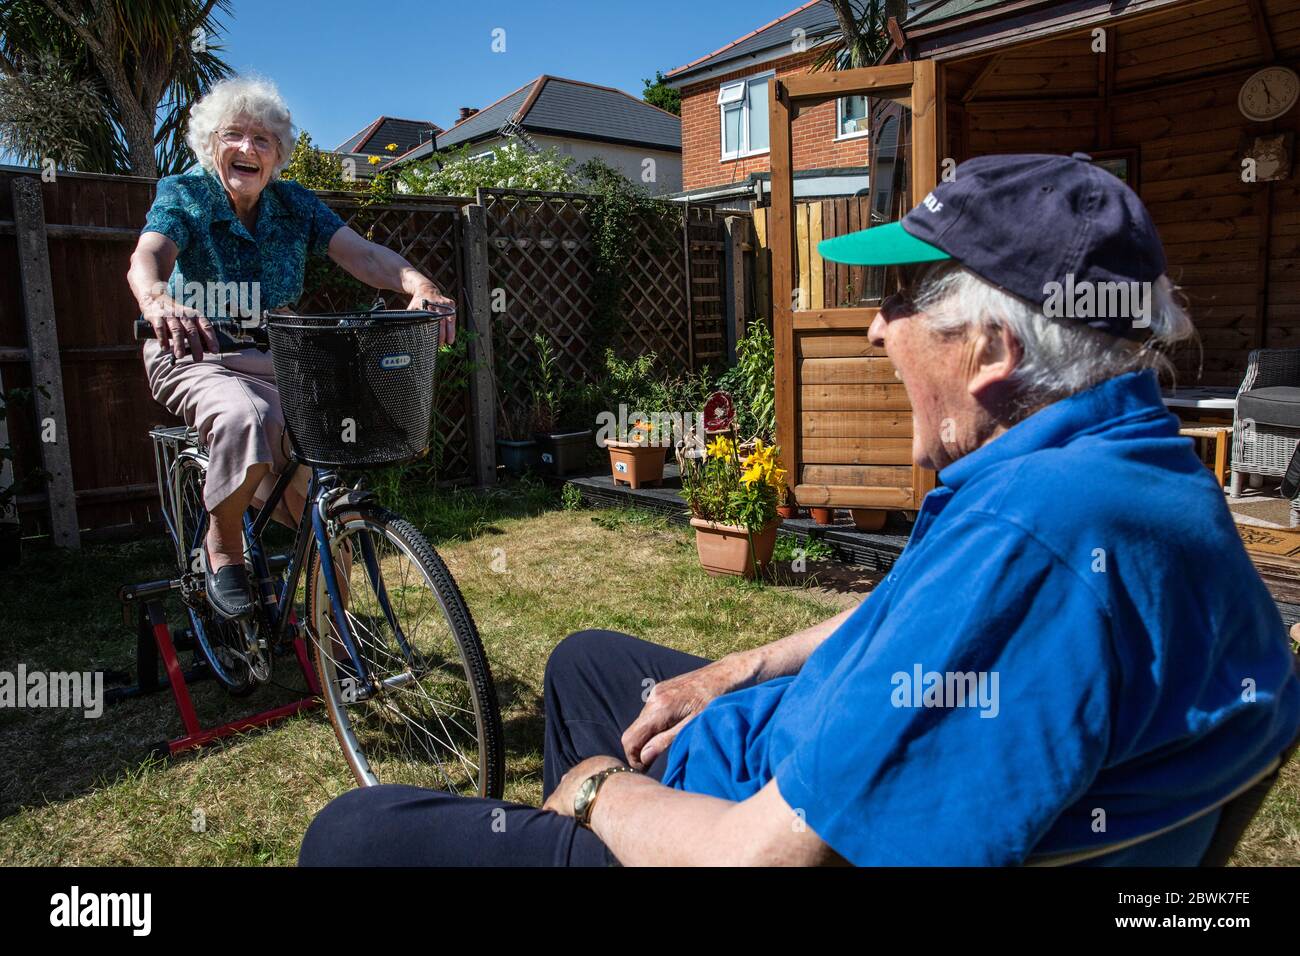 Elderly couple both in their 80's keeping fit on a bicycle trainer stand in their back garden during the coronavirus lockdown, Southwest England, UK Stock Photo